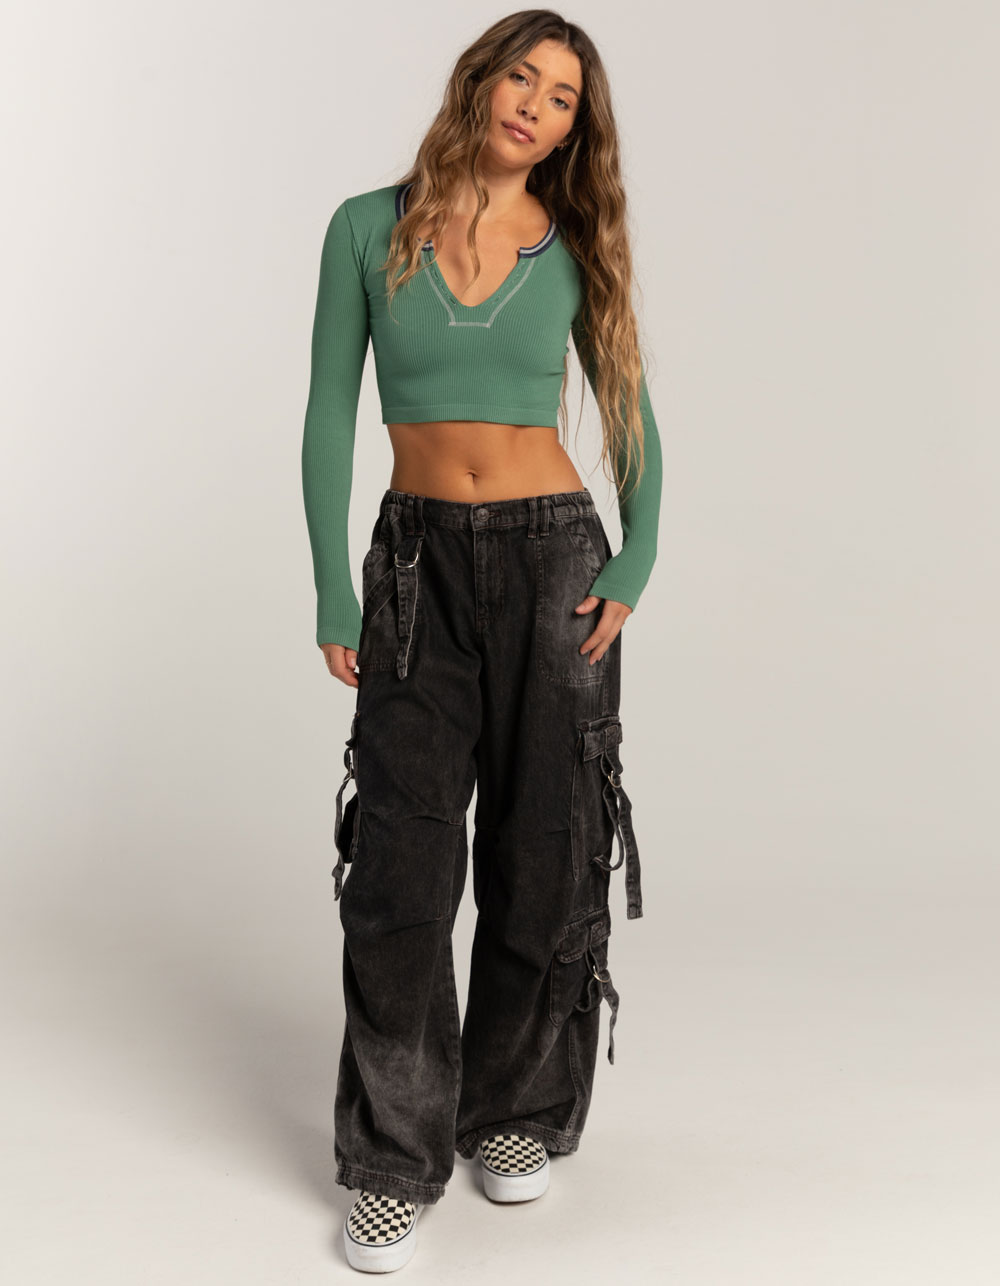 BDG Urban Outfitters Denim Strappy Womens Cargo Pants